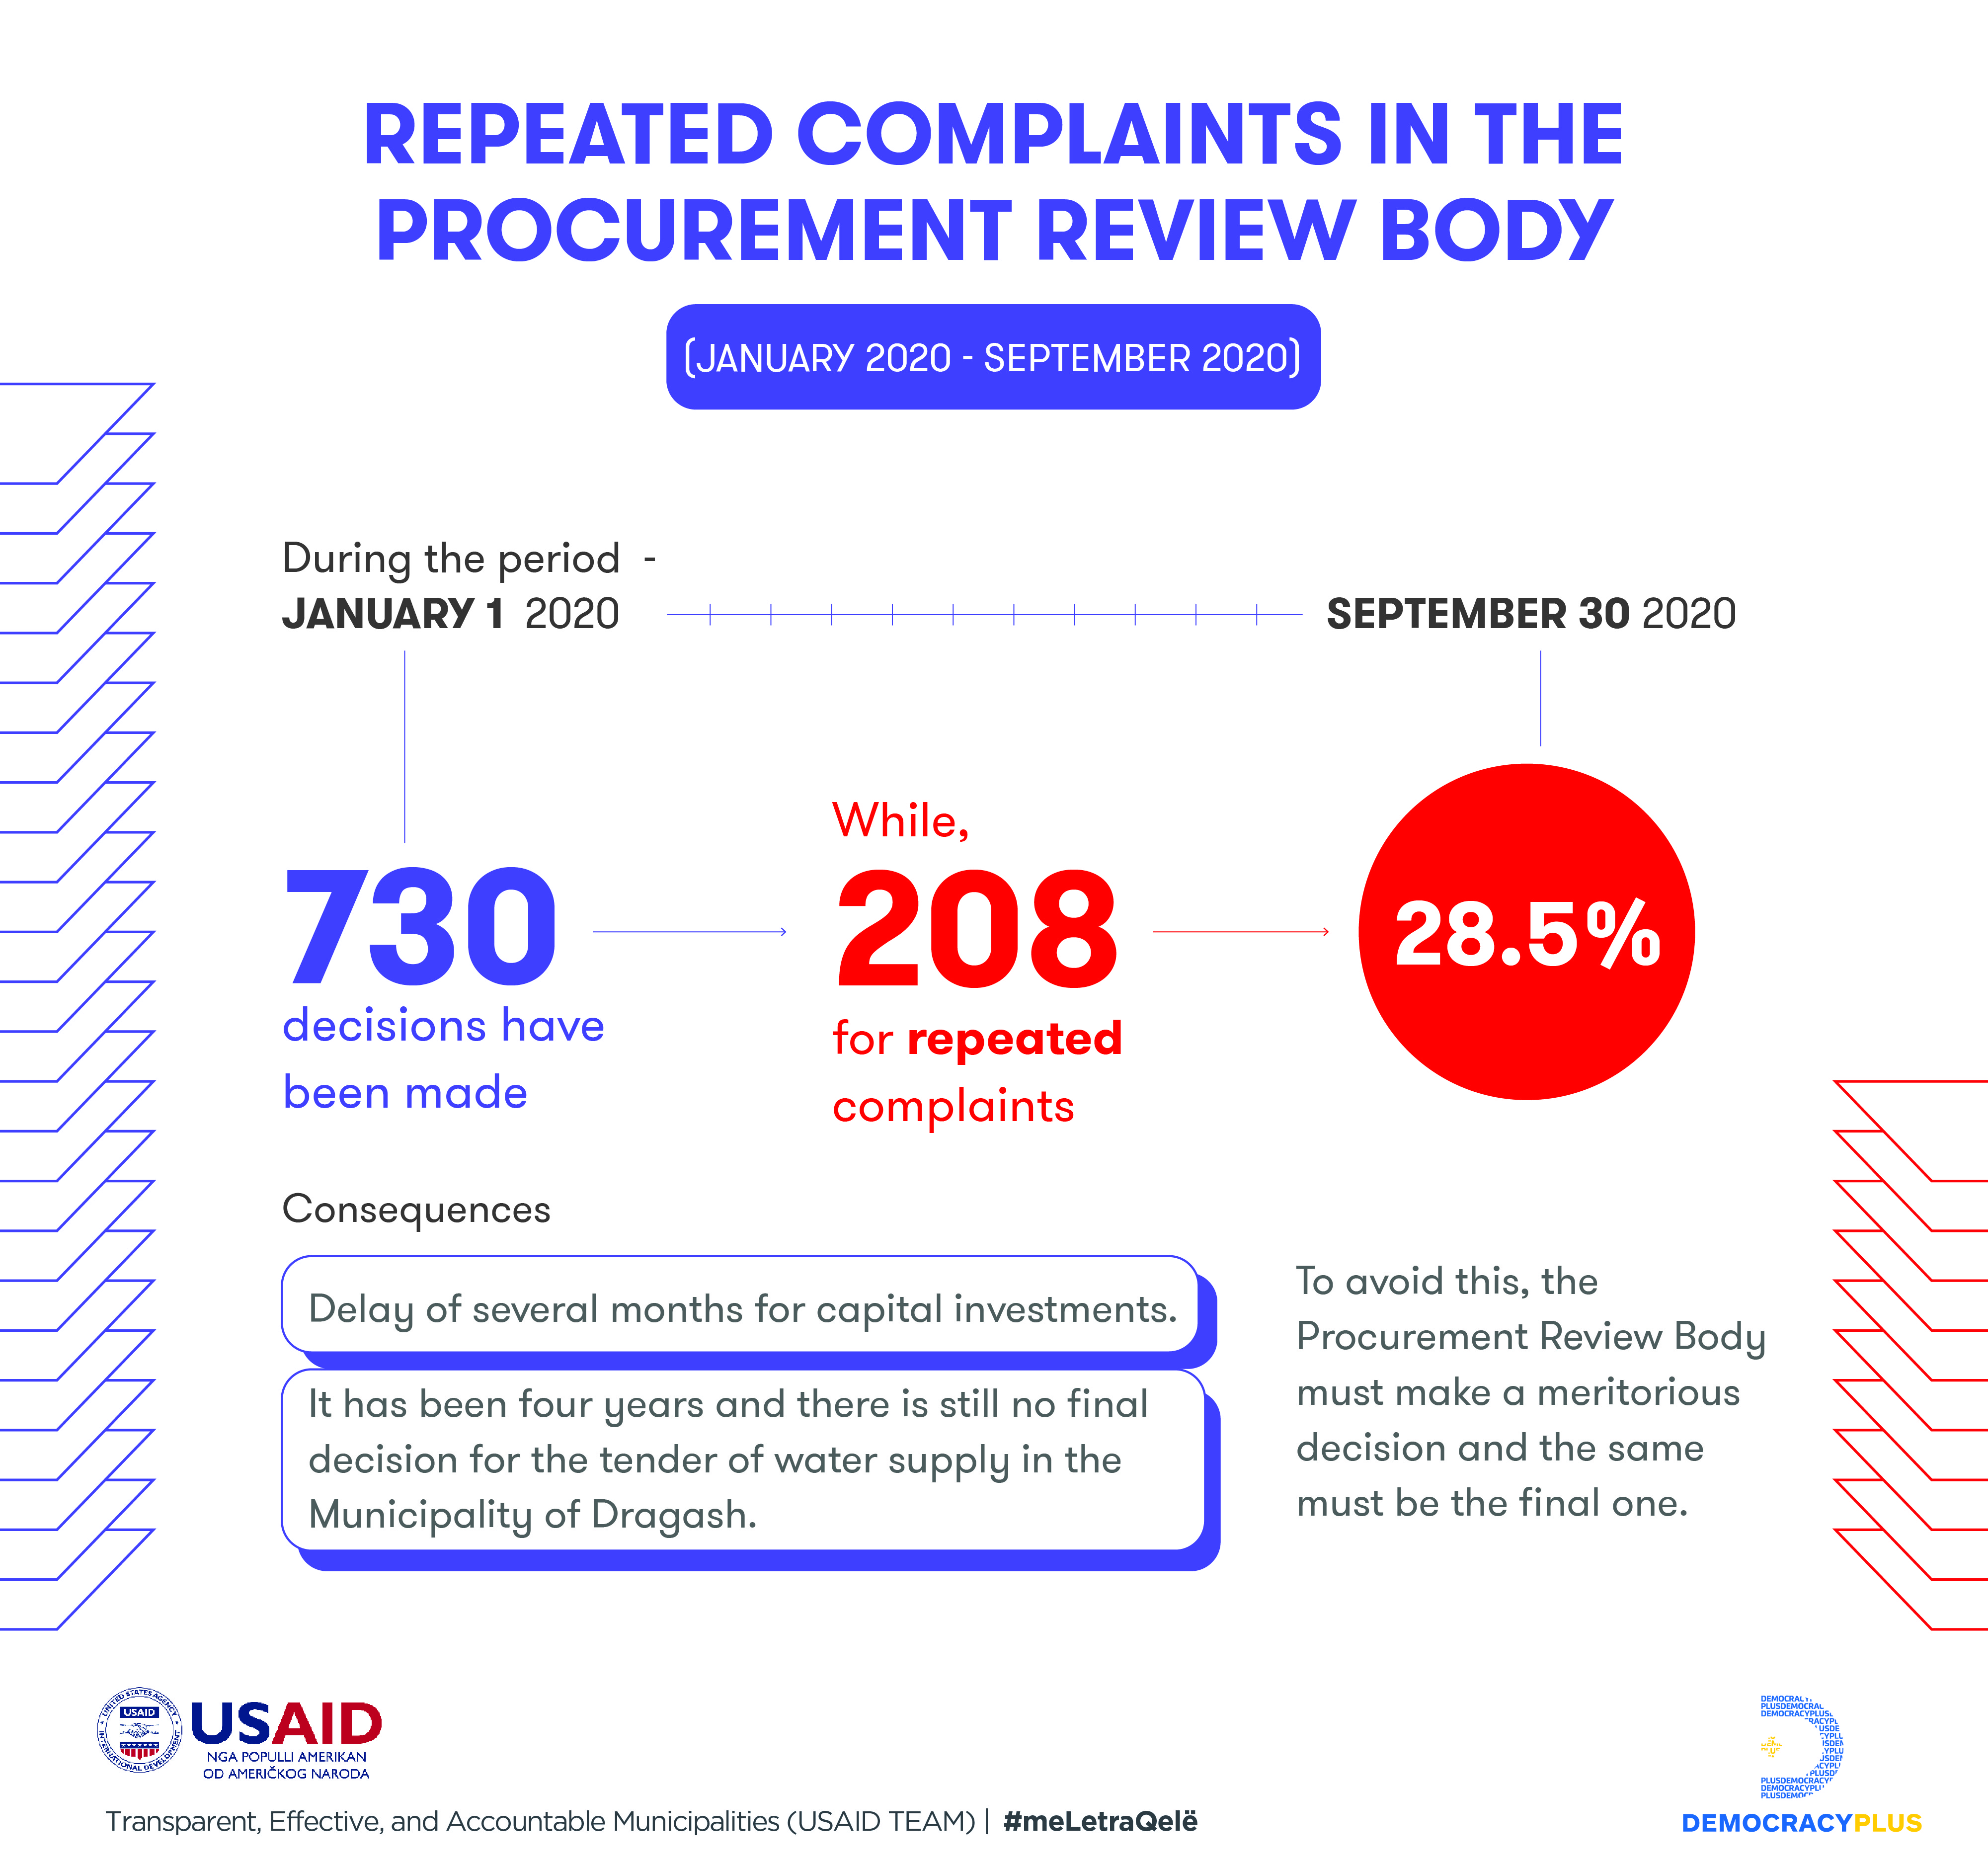 Repeated complaints in the Procurment Review Body